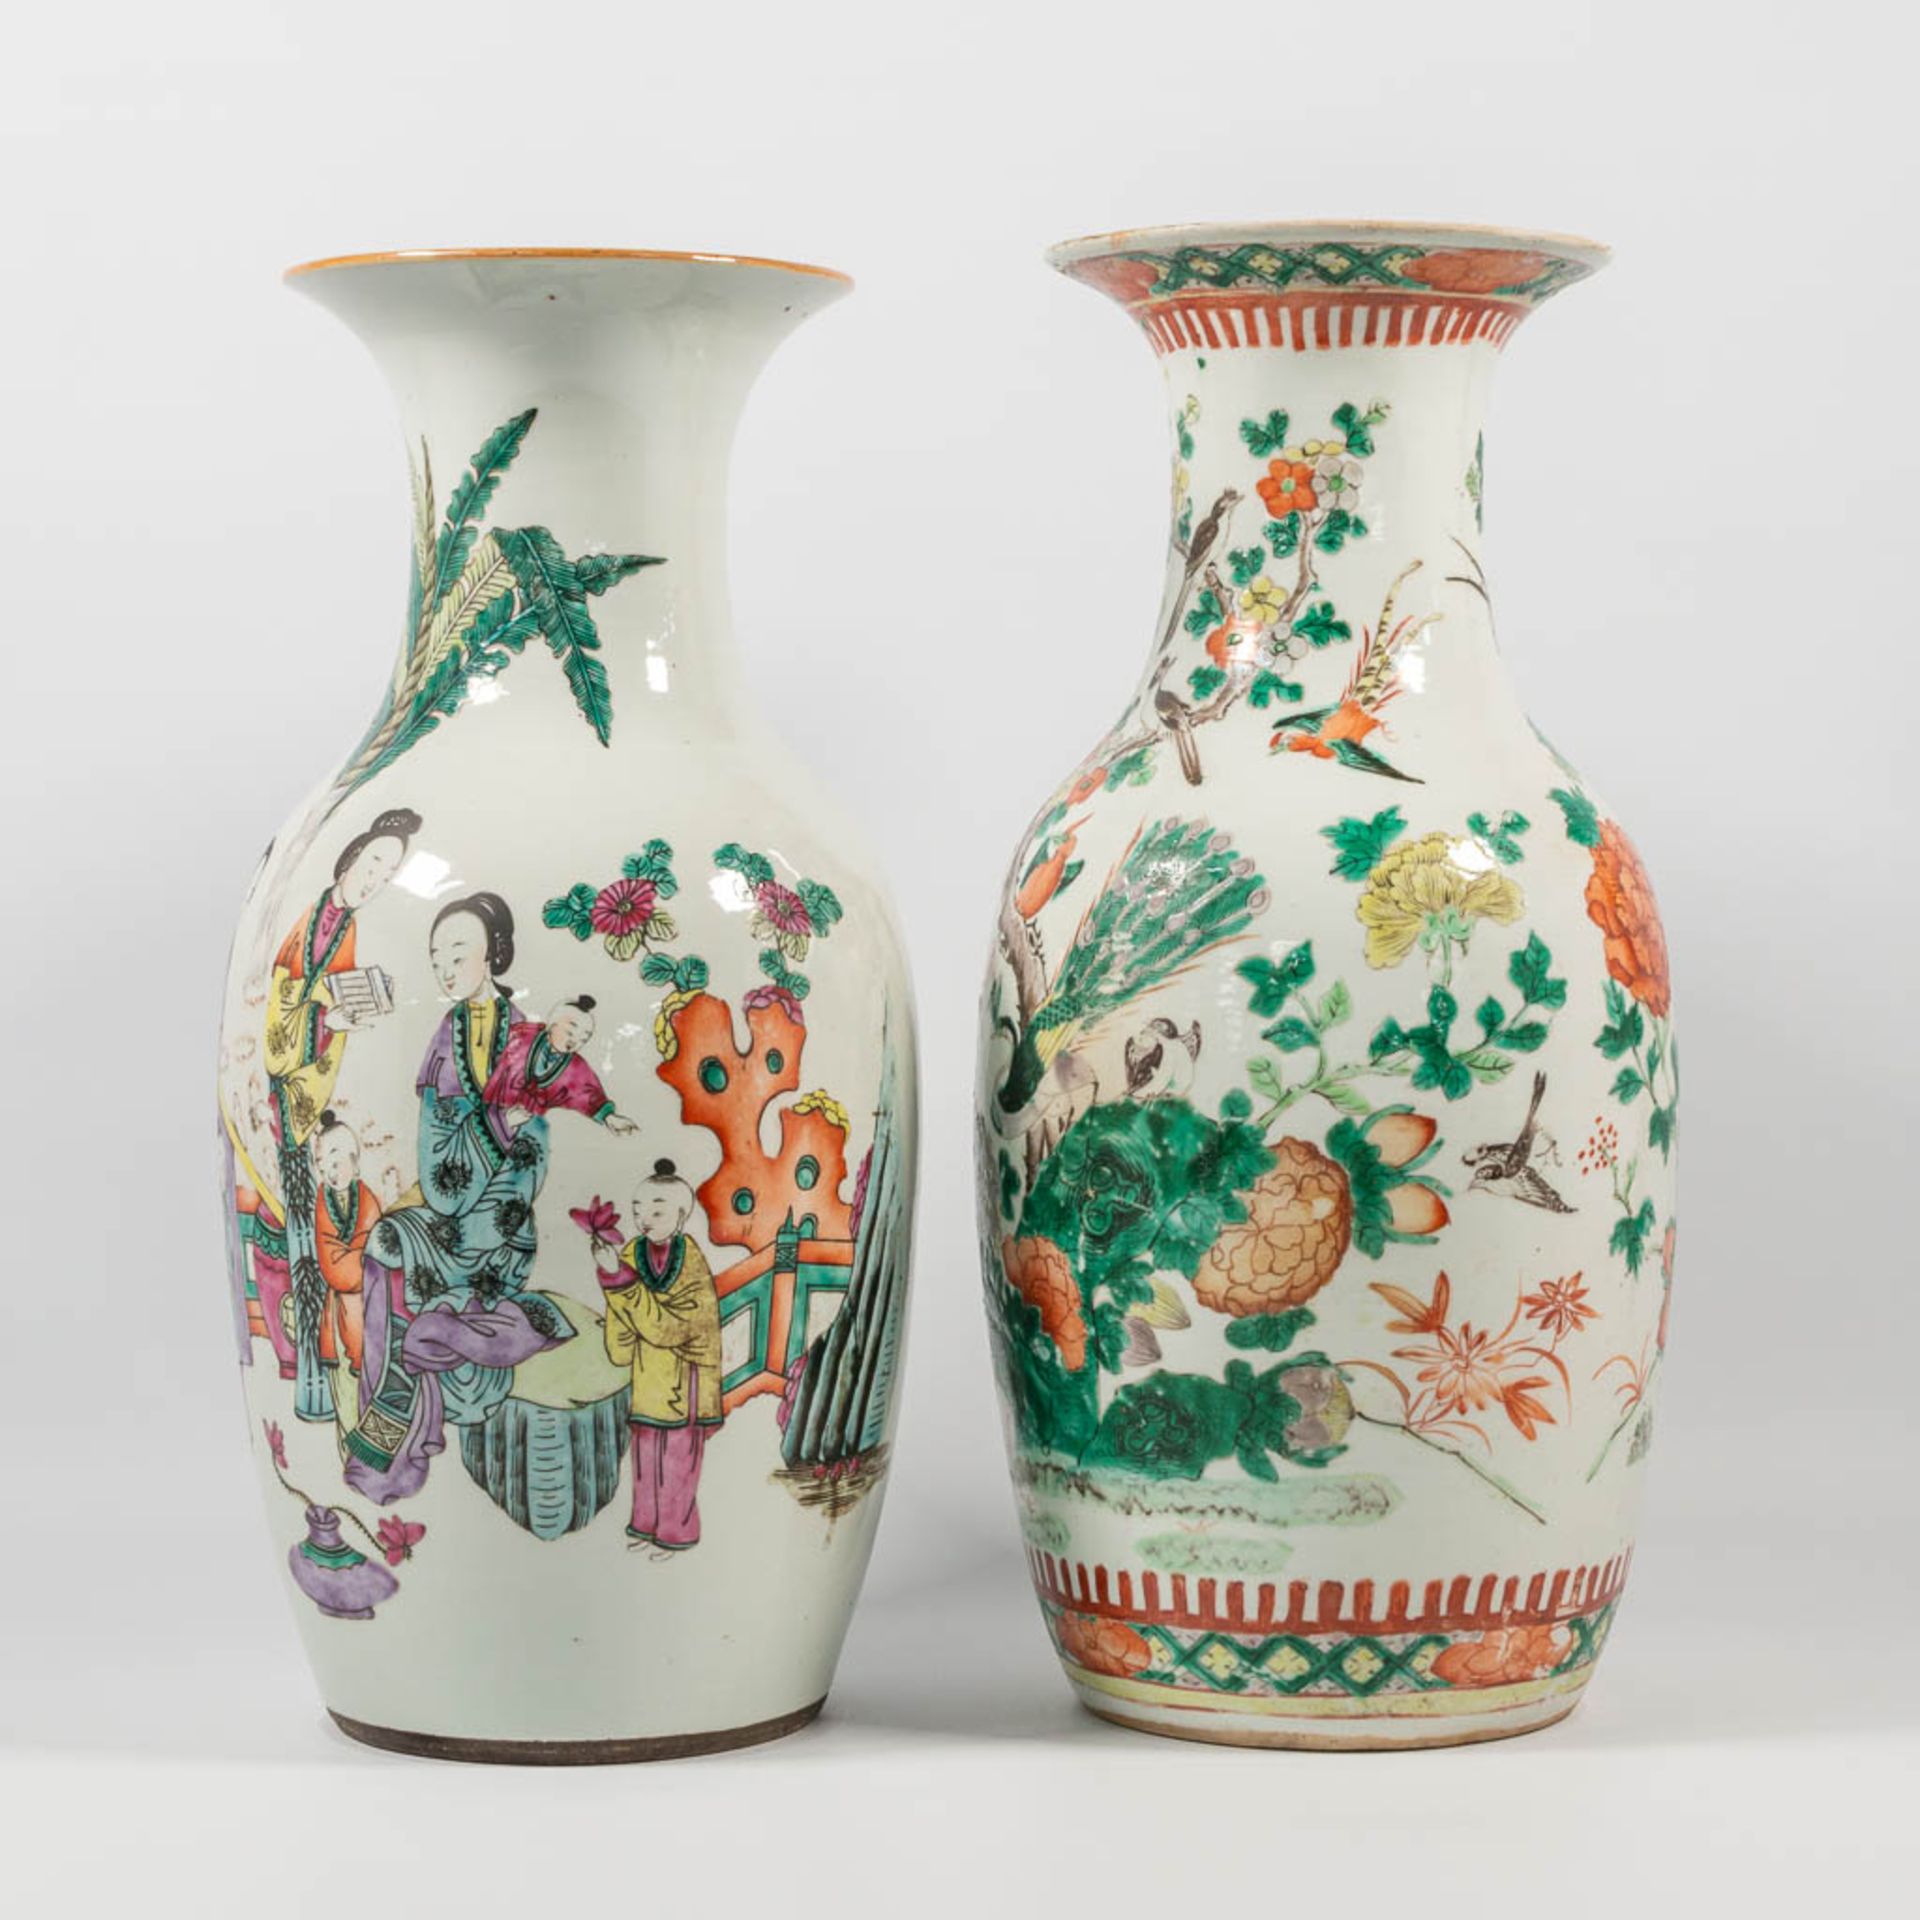 A collection of 2 Chinese vases, with decor of Ladies in court and peacocks. 19th/20th century. - Image 13 of 14